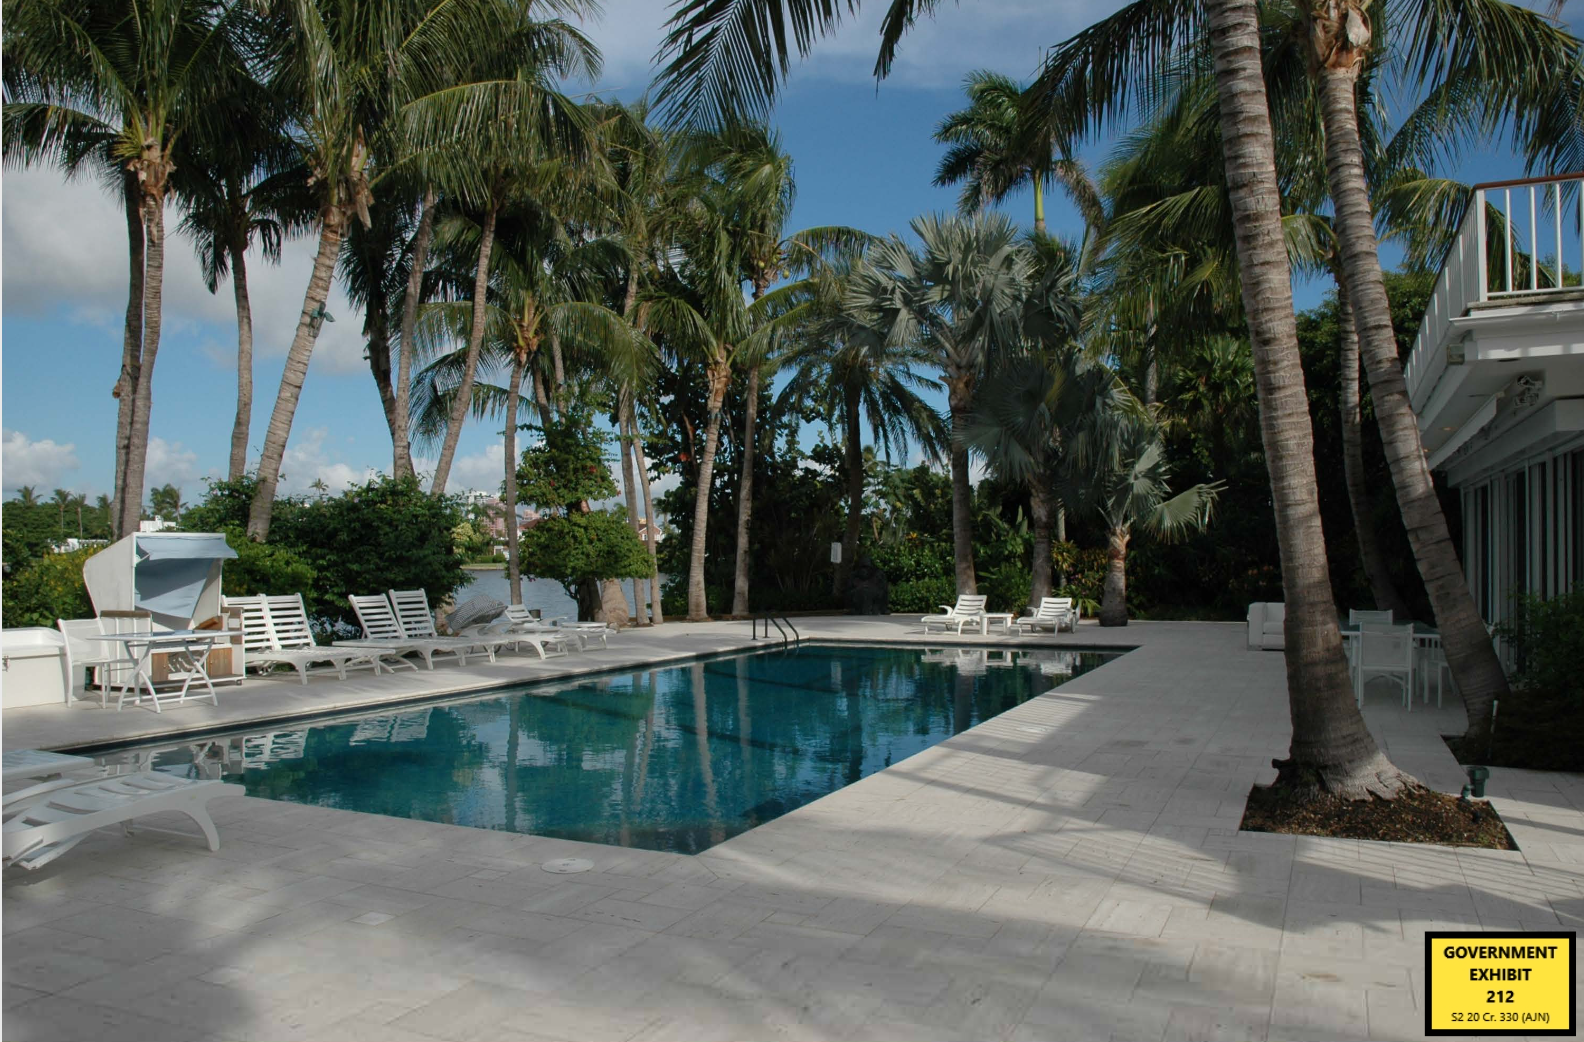 The search of Epstein’s Palm Beach mansion on El Brillo Way led to his 2008 indictment